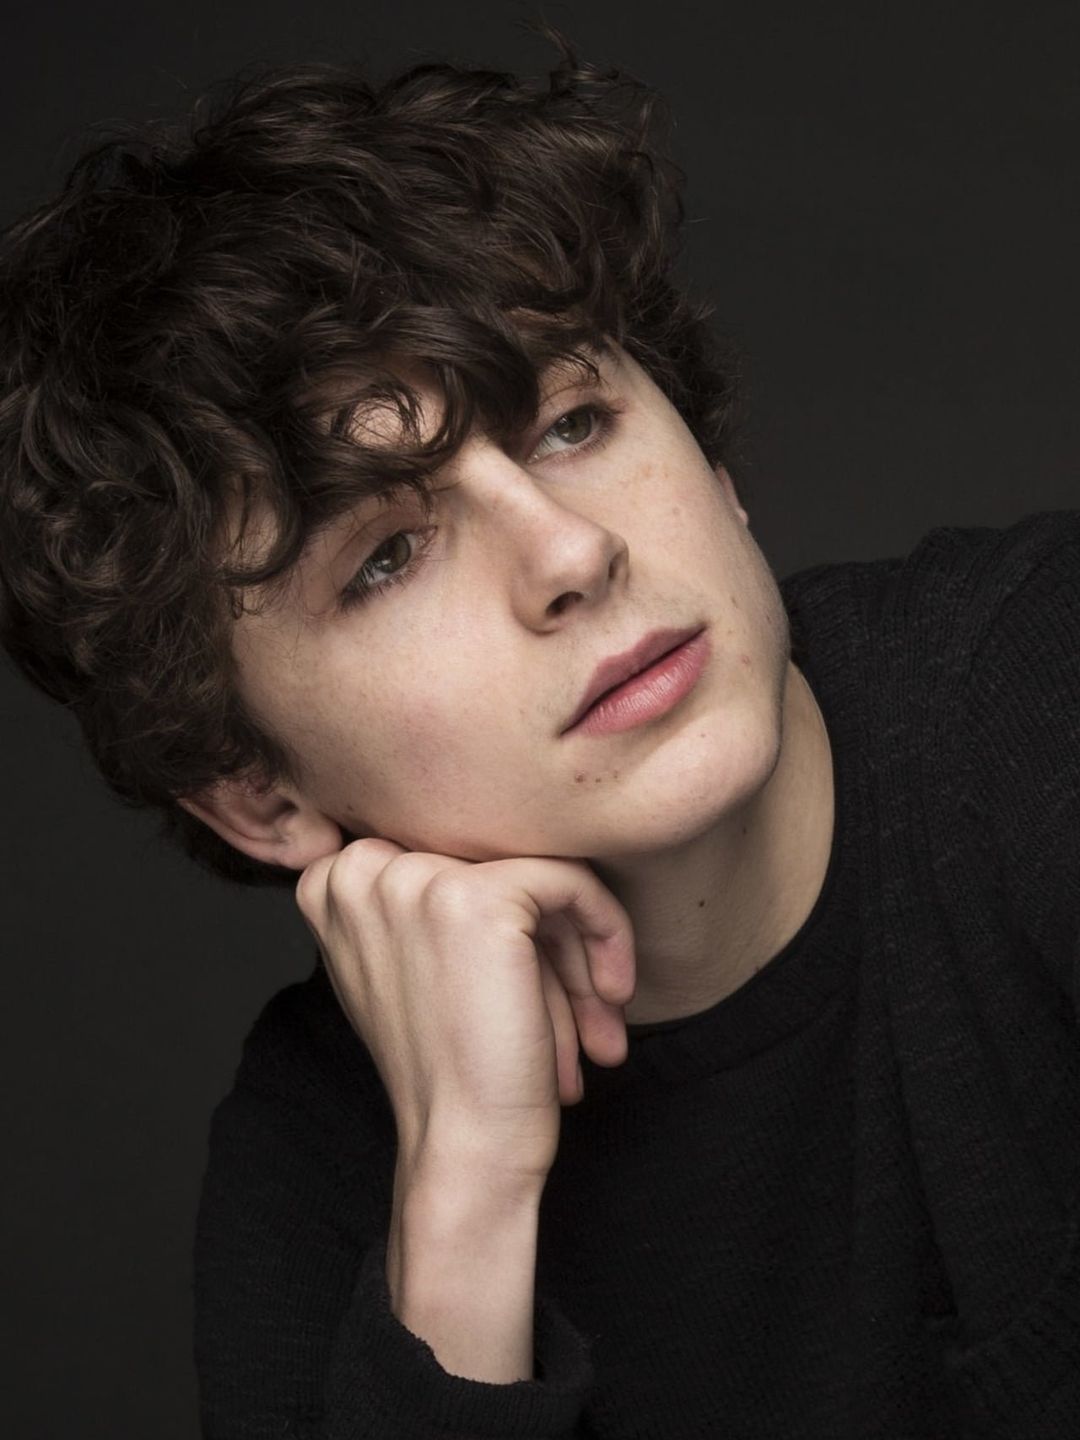 Timothee Chalamet young age